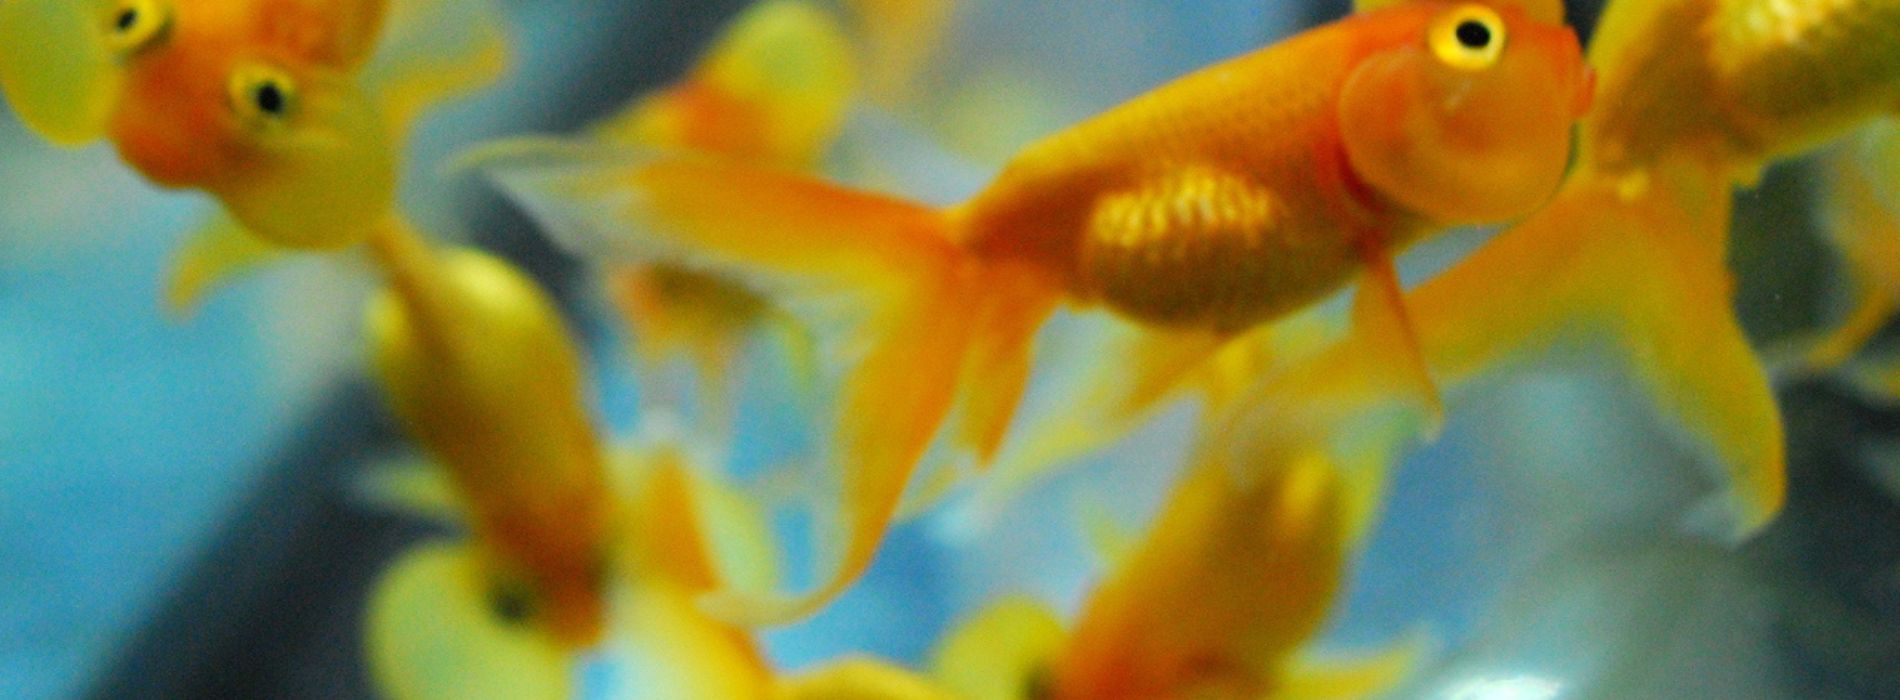 bubble-eye-goldfishes-swimming-in-a-big-tank